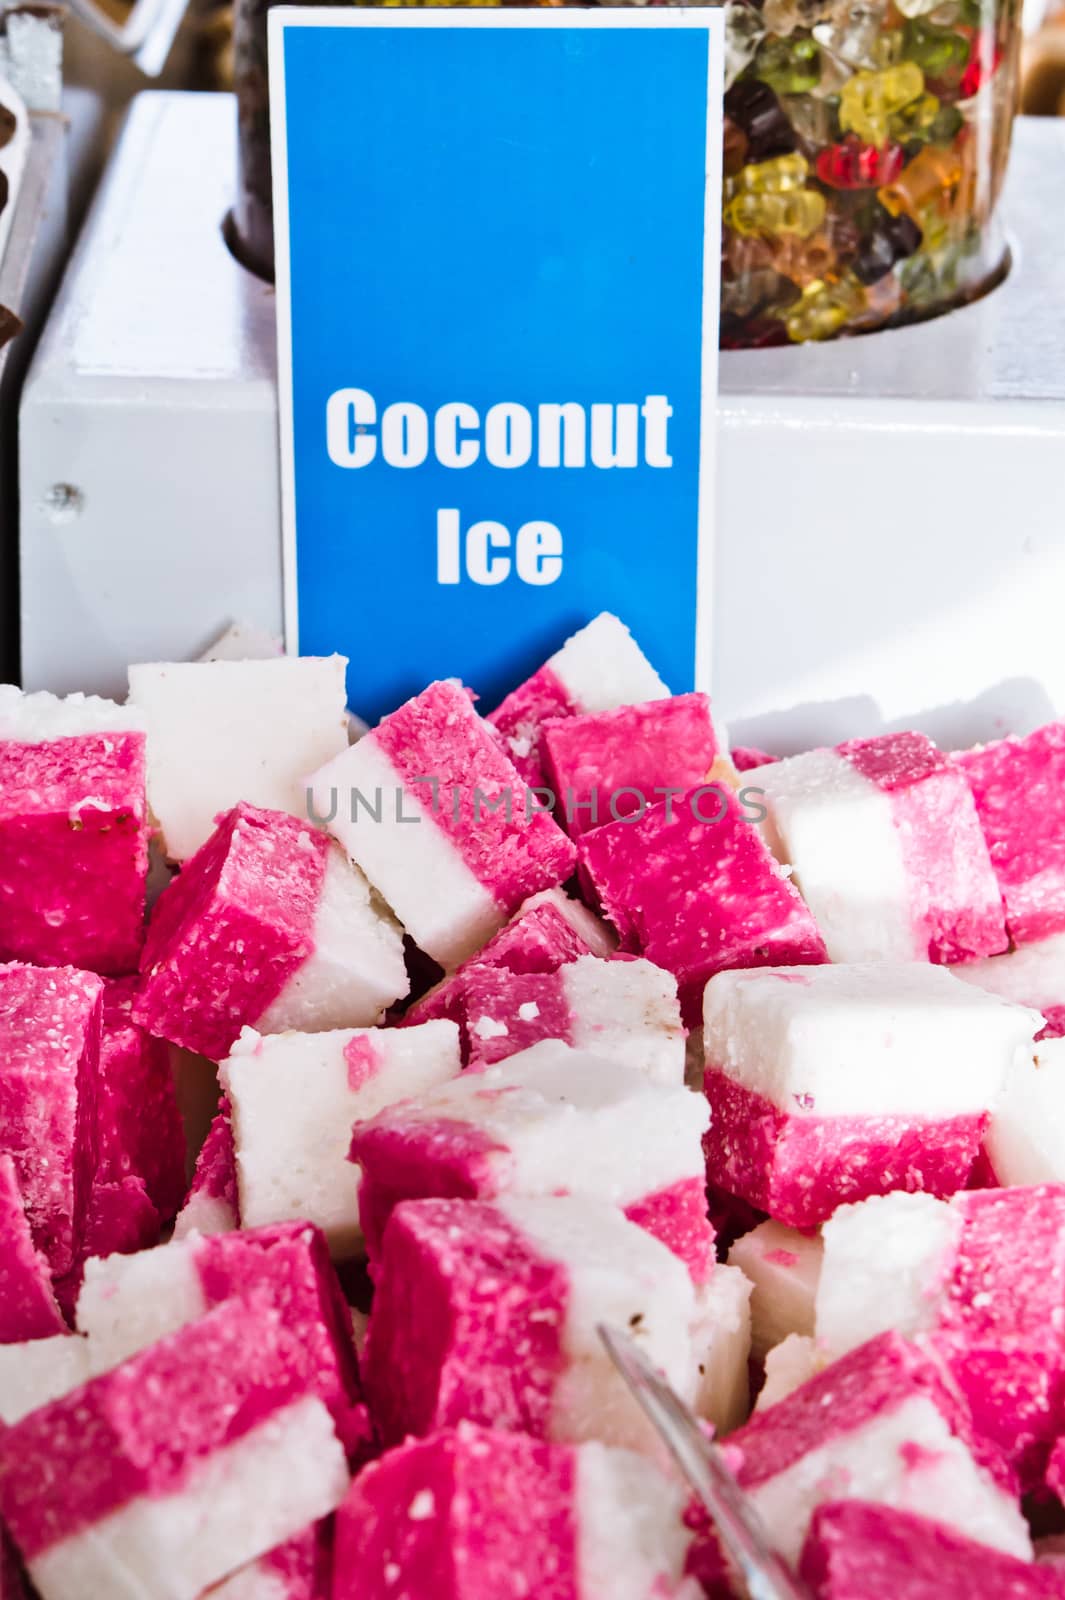 Display of coconut ice sweets at a market